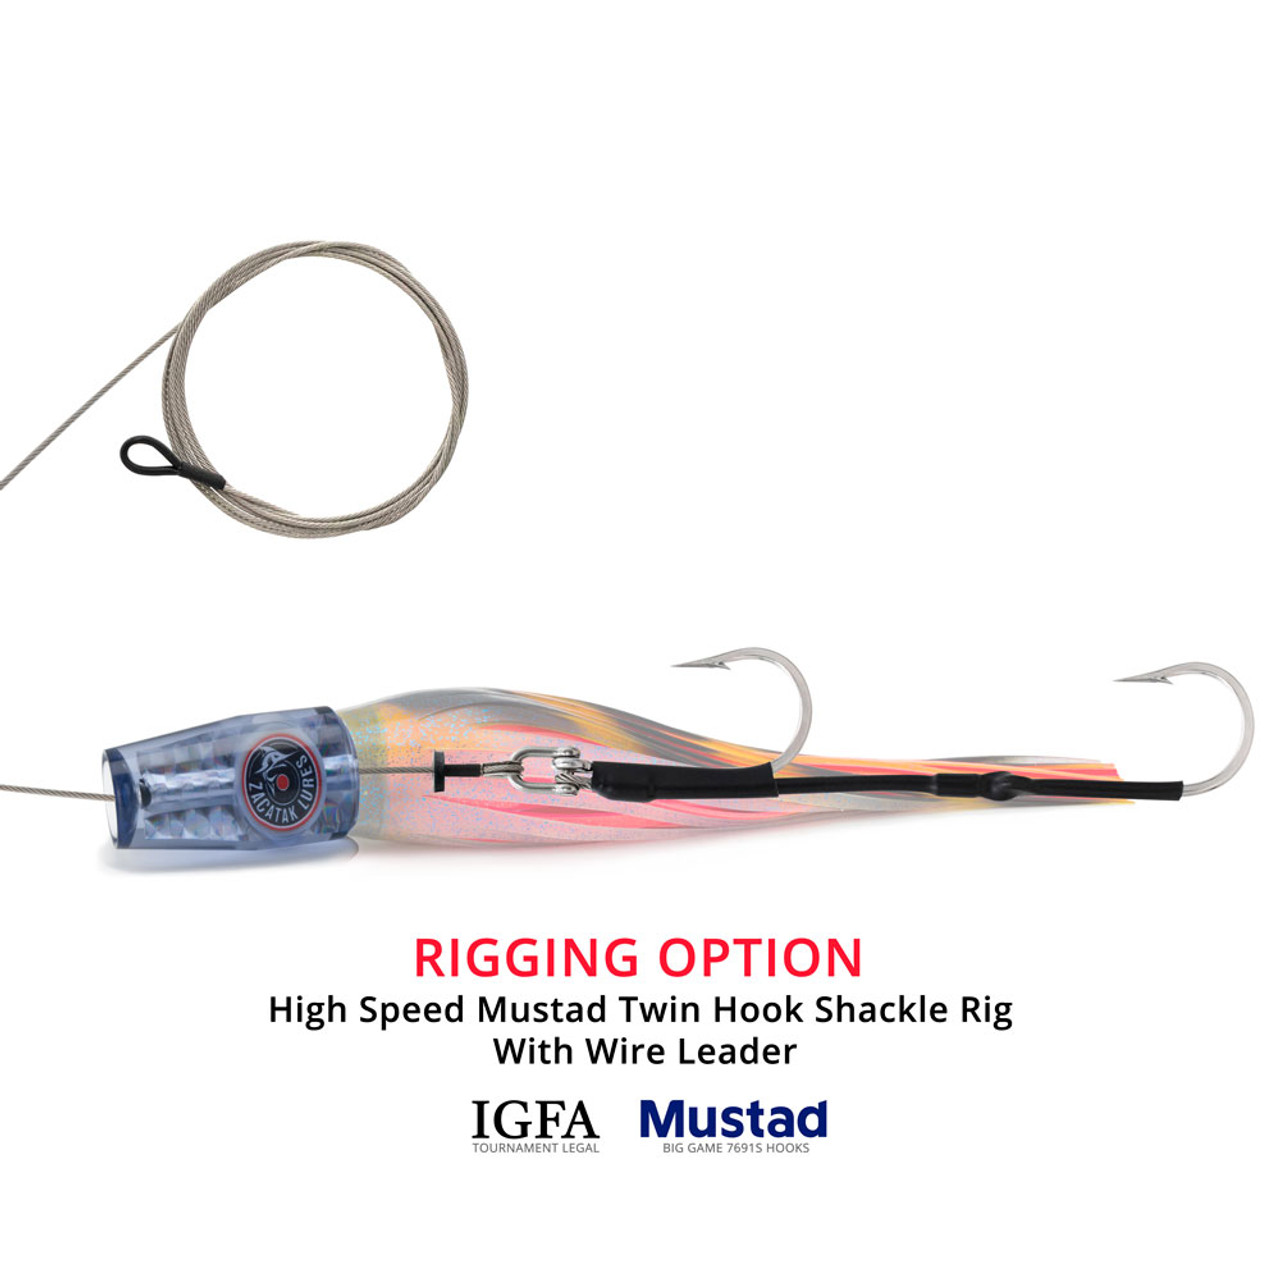 https://cdn11.bigcommerce.com/s-sv4r4mic/images/stencil/1280x1280/products/9062/49257/zacatak-lures-high-speed-rigging-option-twin-hook-shackle-rig-smoka__94956.1671433928.jpg?c=2?imbypass=on